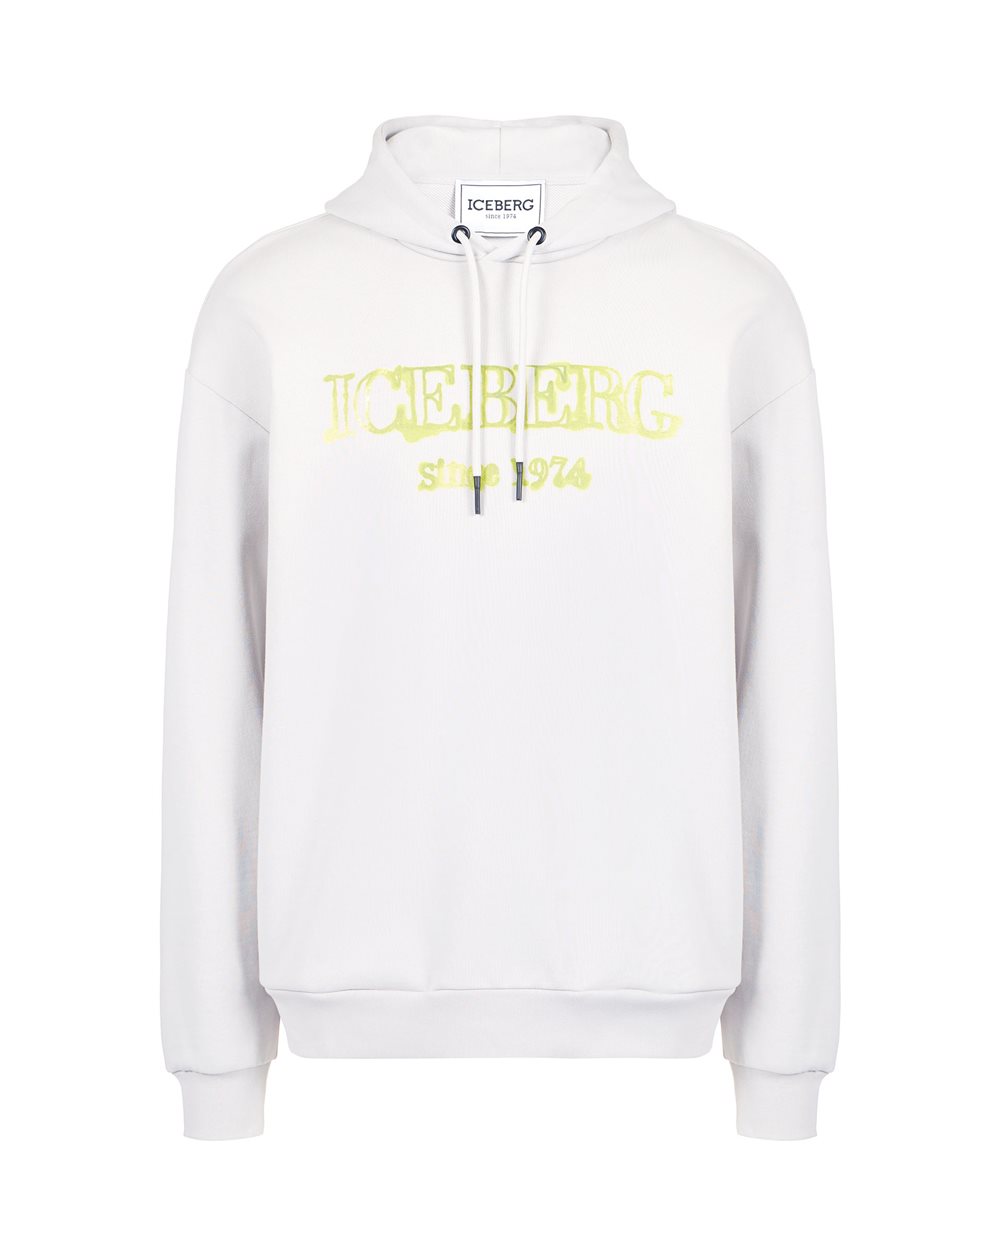 Sweatshirt with hood and logo - per abilitare | Iceberg - Official Website